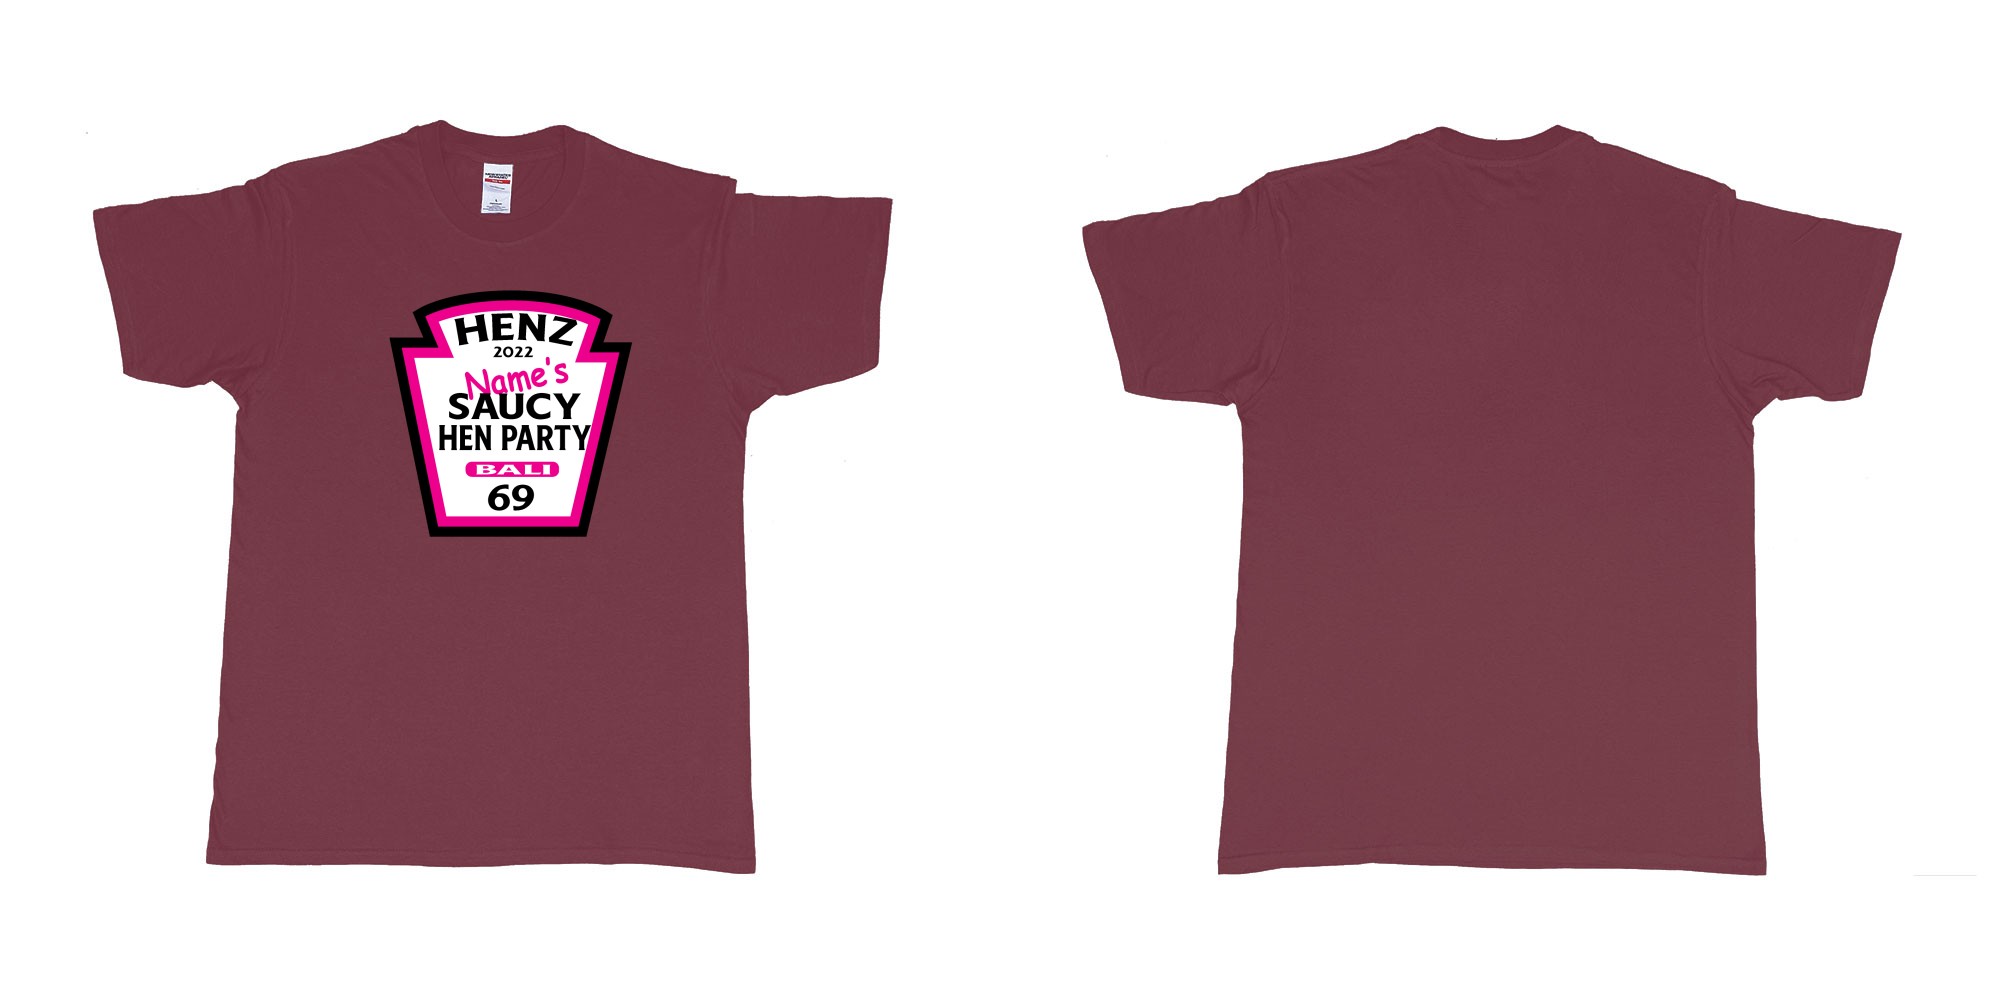 Custom tshirt design TPW Heinz ketchup hen night in fabric color marron choice your own text made in Bali by The Pirate Way